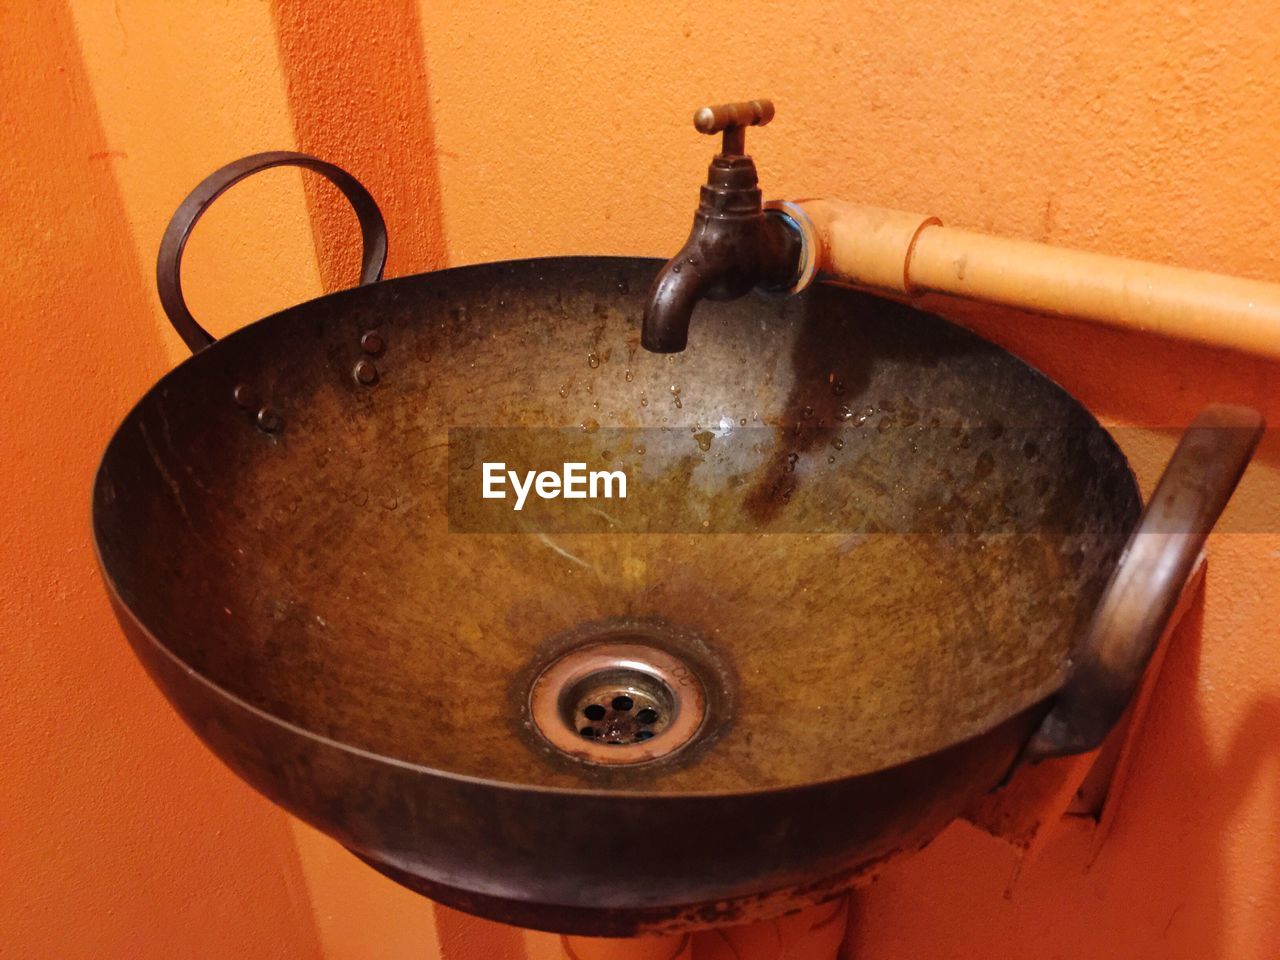 CLOSE-UP OF SINK IN KITCHEN